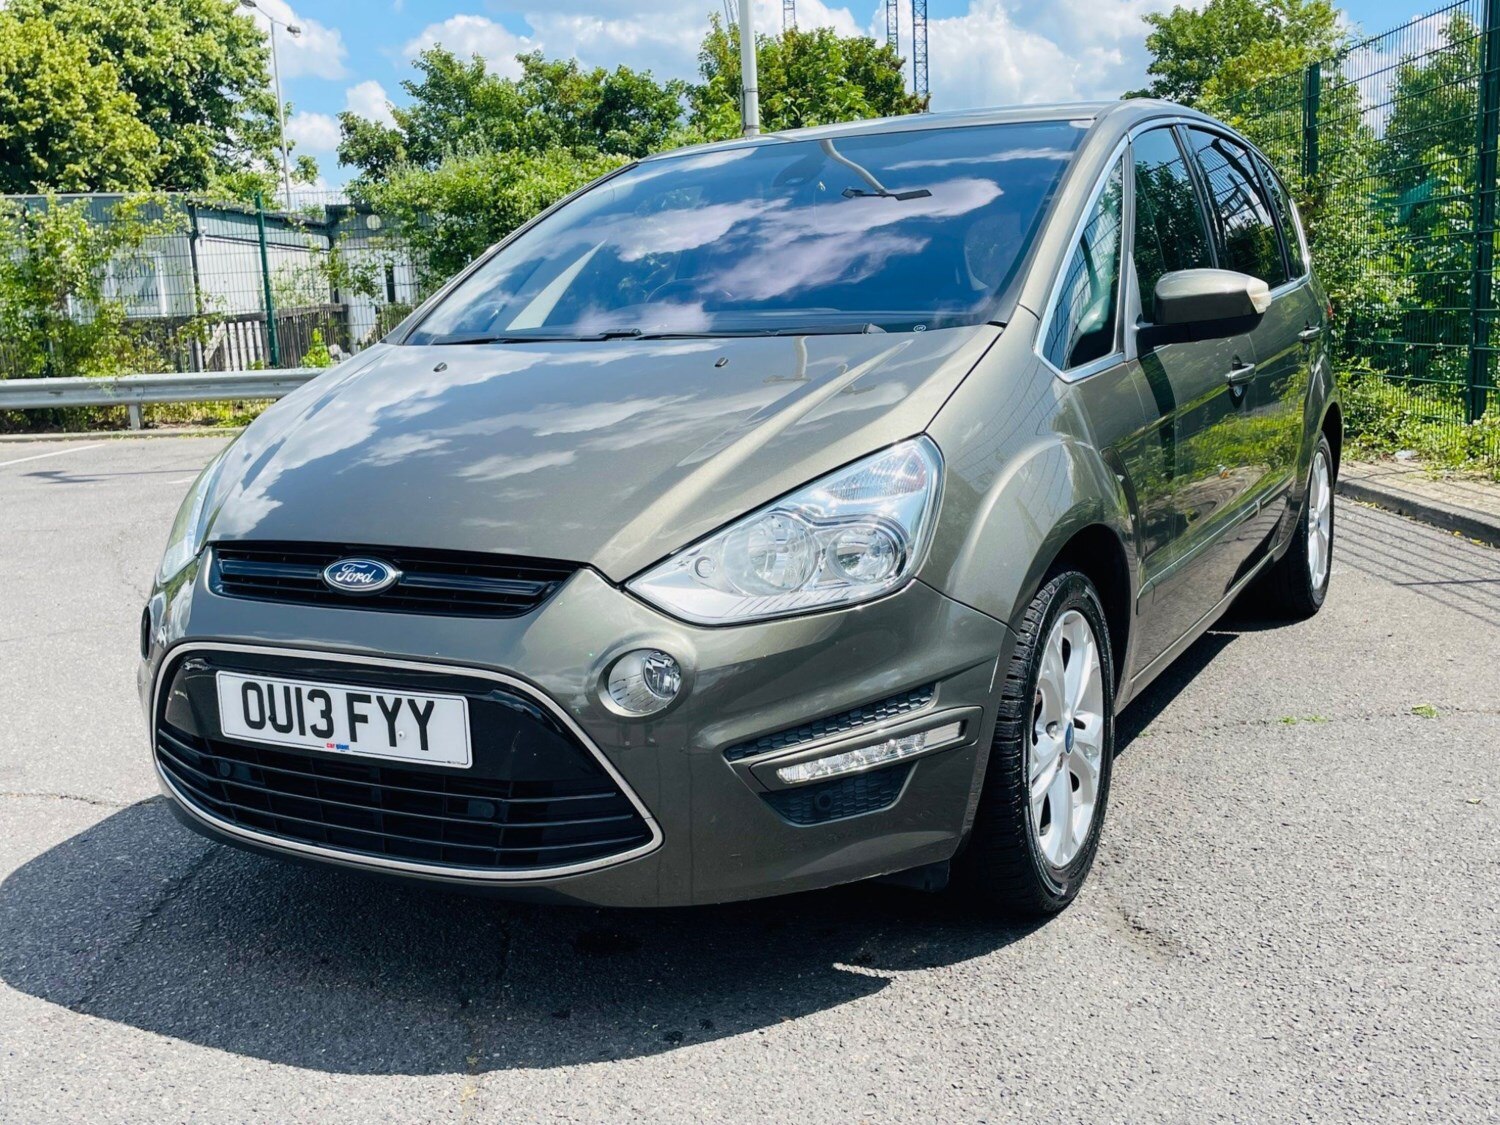 Ford S-MAX Green Car Review 